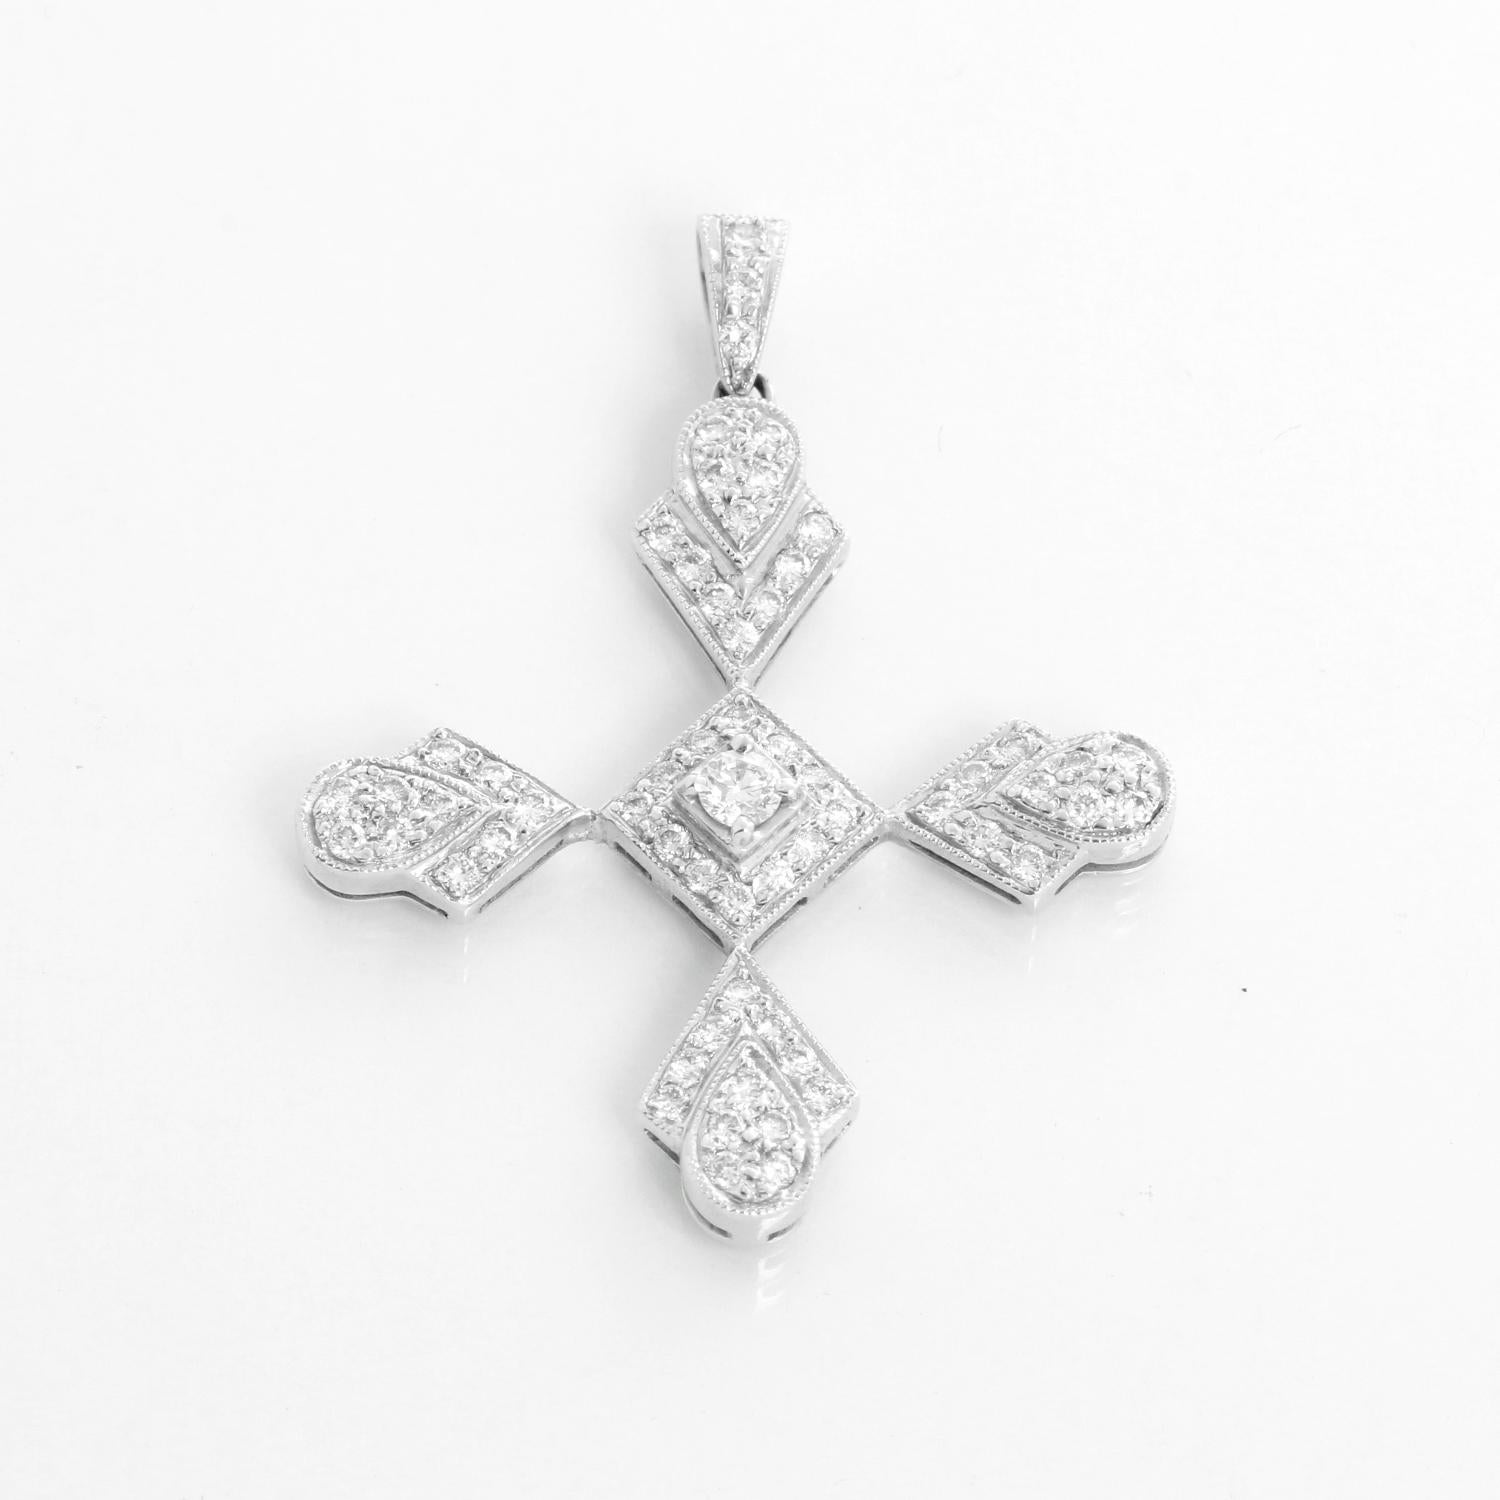 Stunning Sue Gragg 18k White Gold Diamond Cross with Necklace - Measures 1.25 inches in length and width. Chain length 16 inches.  Approx. 1 ct weight 

Sue Gragg is a jewelry designer based in Dallas, Texas, known for her unique and high-end